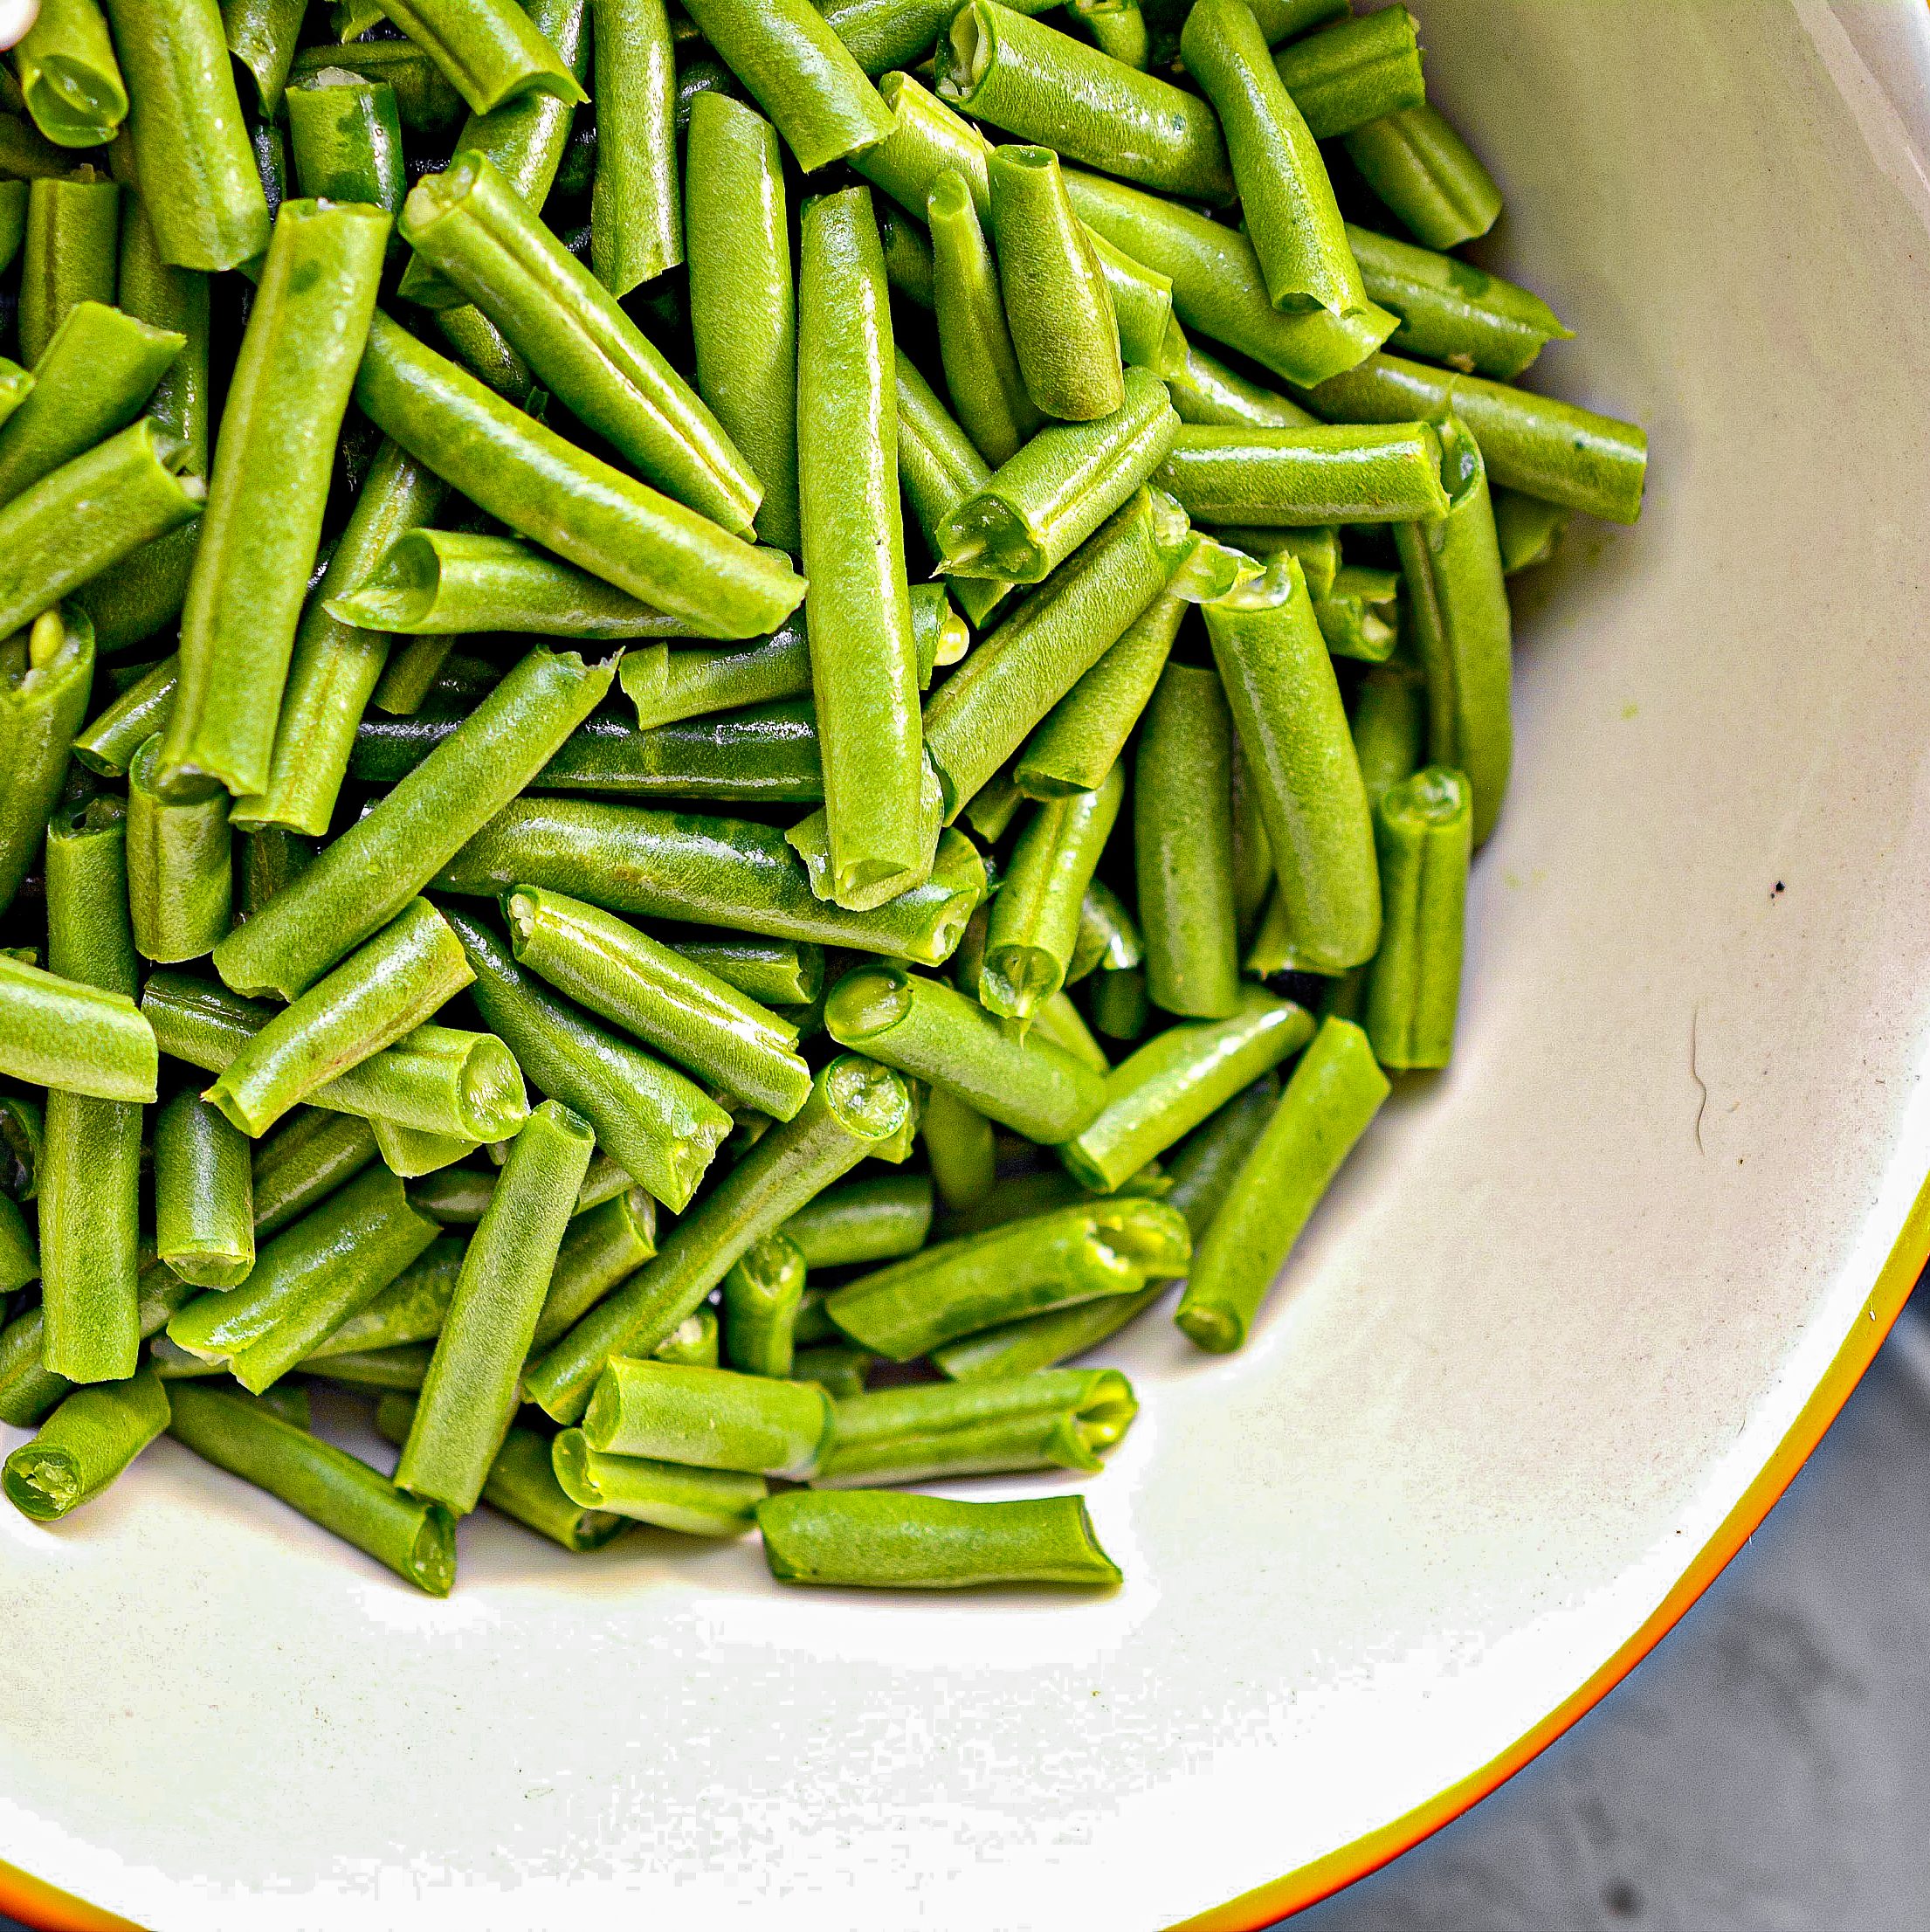 Start by adding 2 lbs of fresh green beans snapped and cut into pieces into a slow cooker.